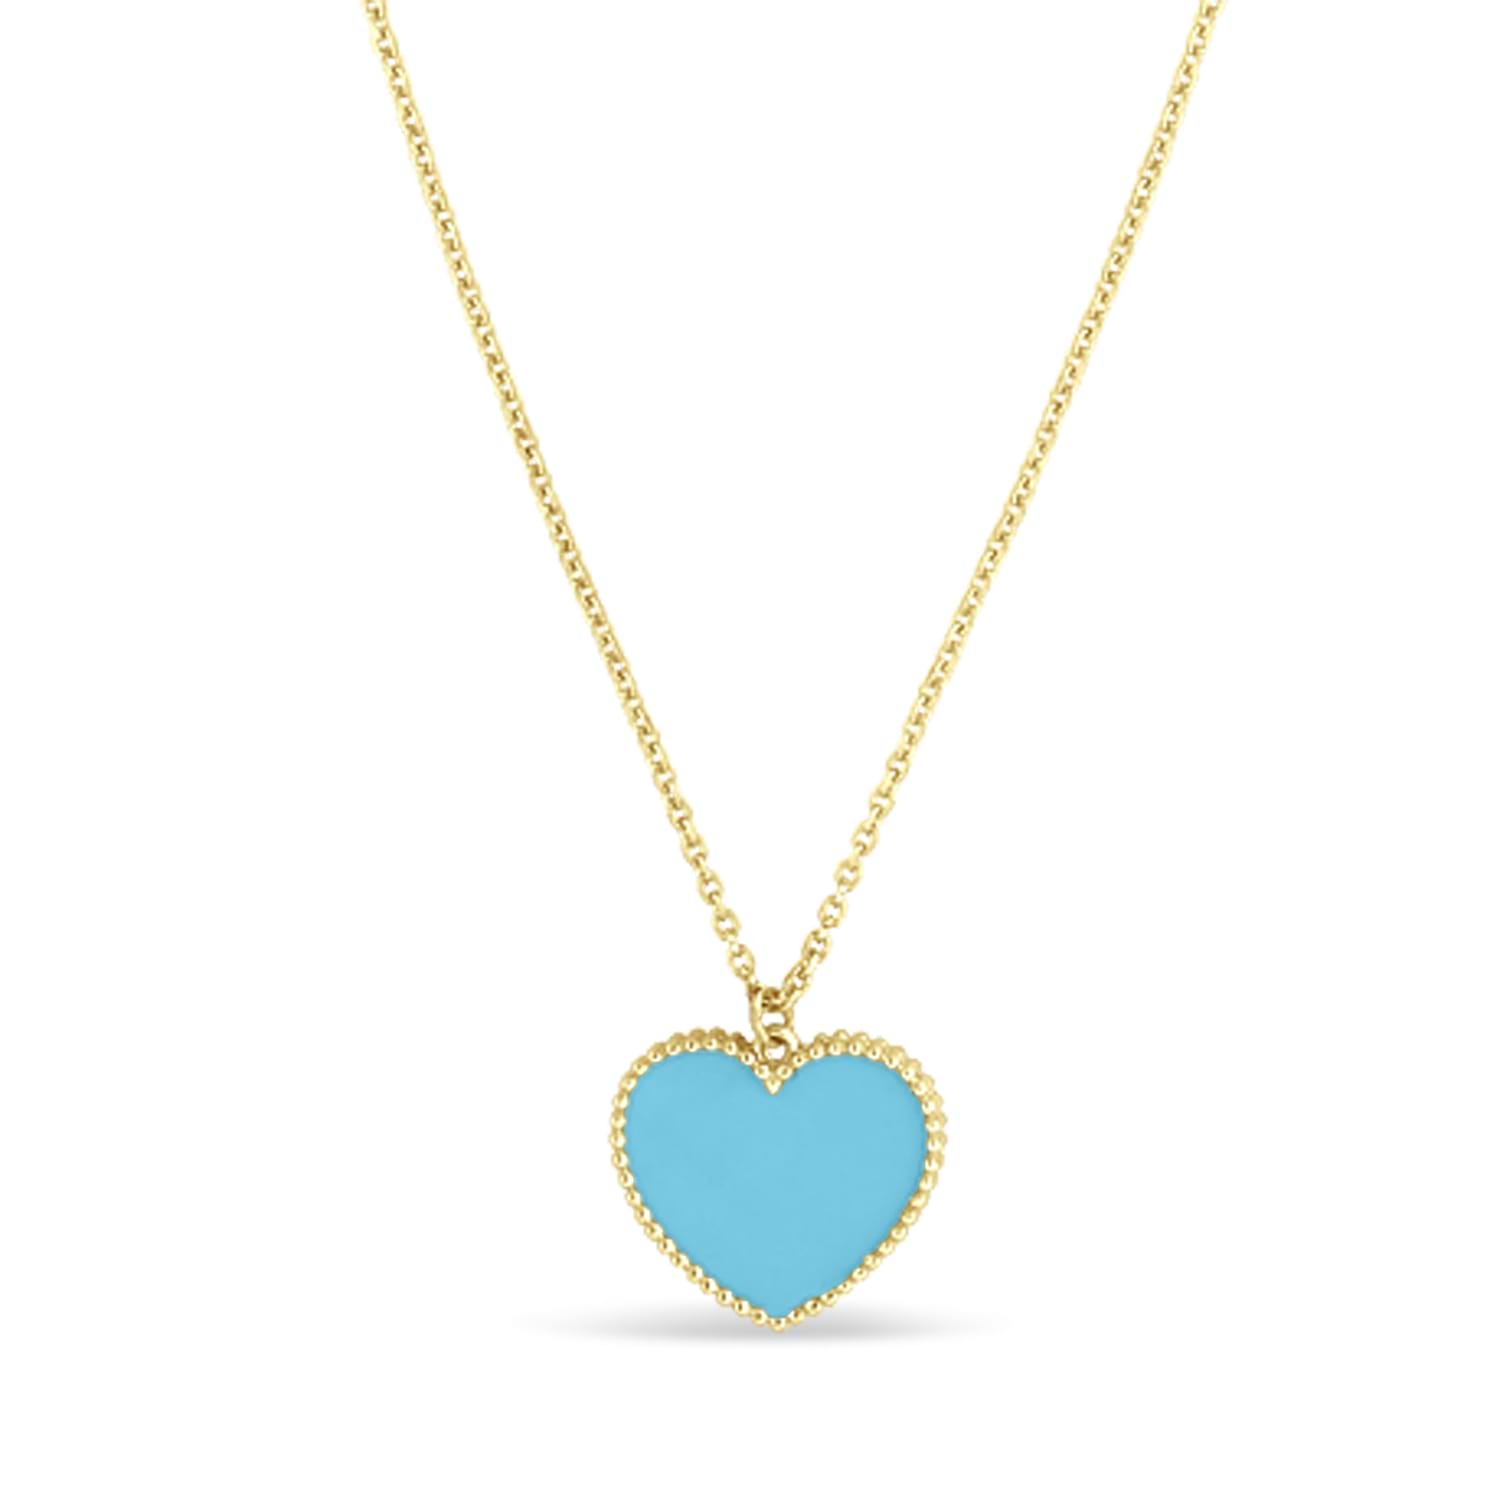 Turquoise Heart Pendant Necklace 14k Yellow Gold